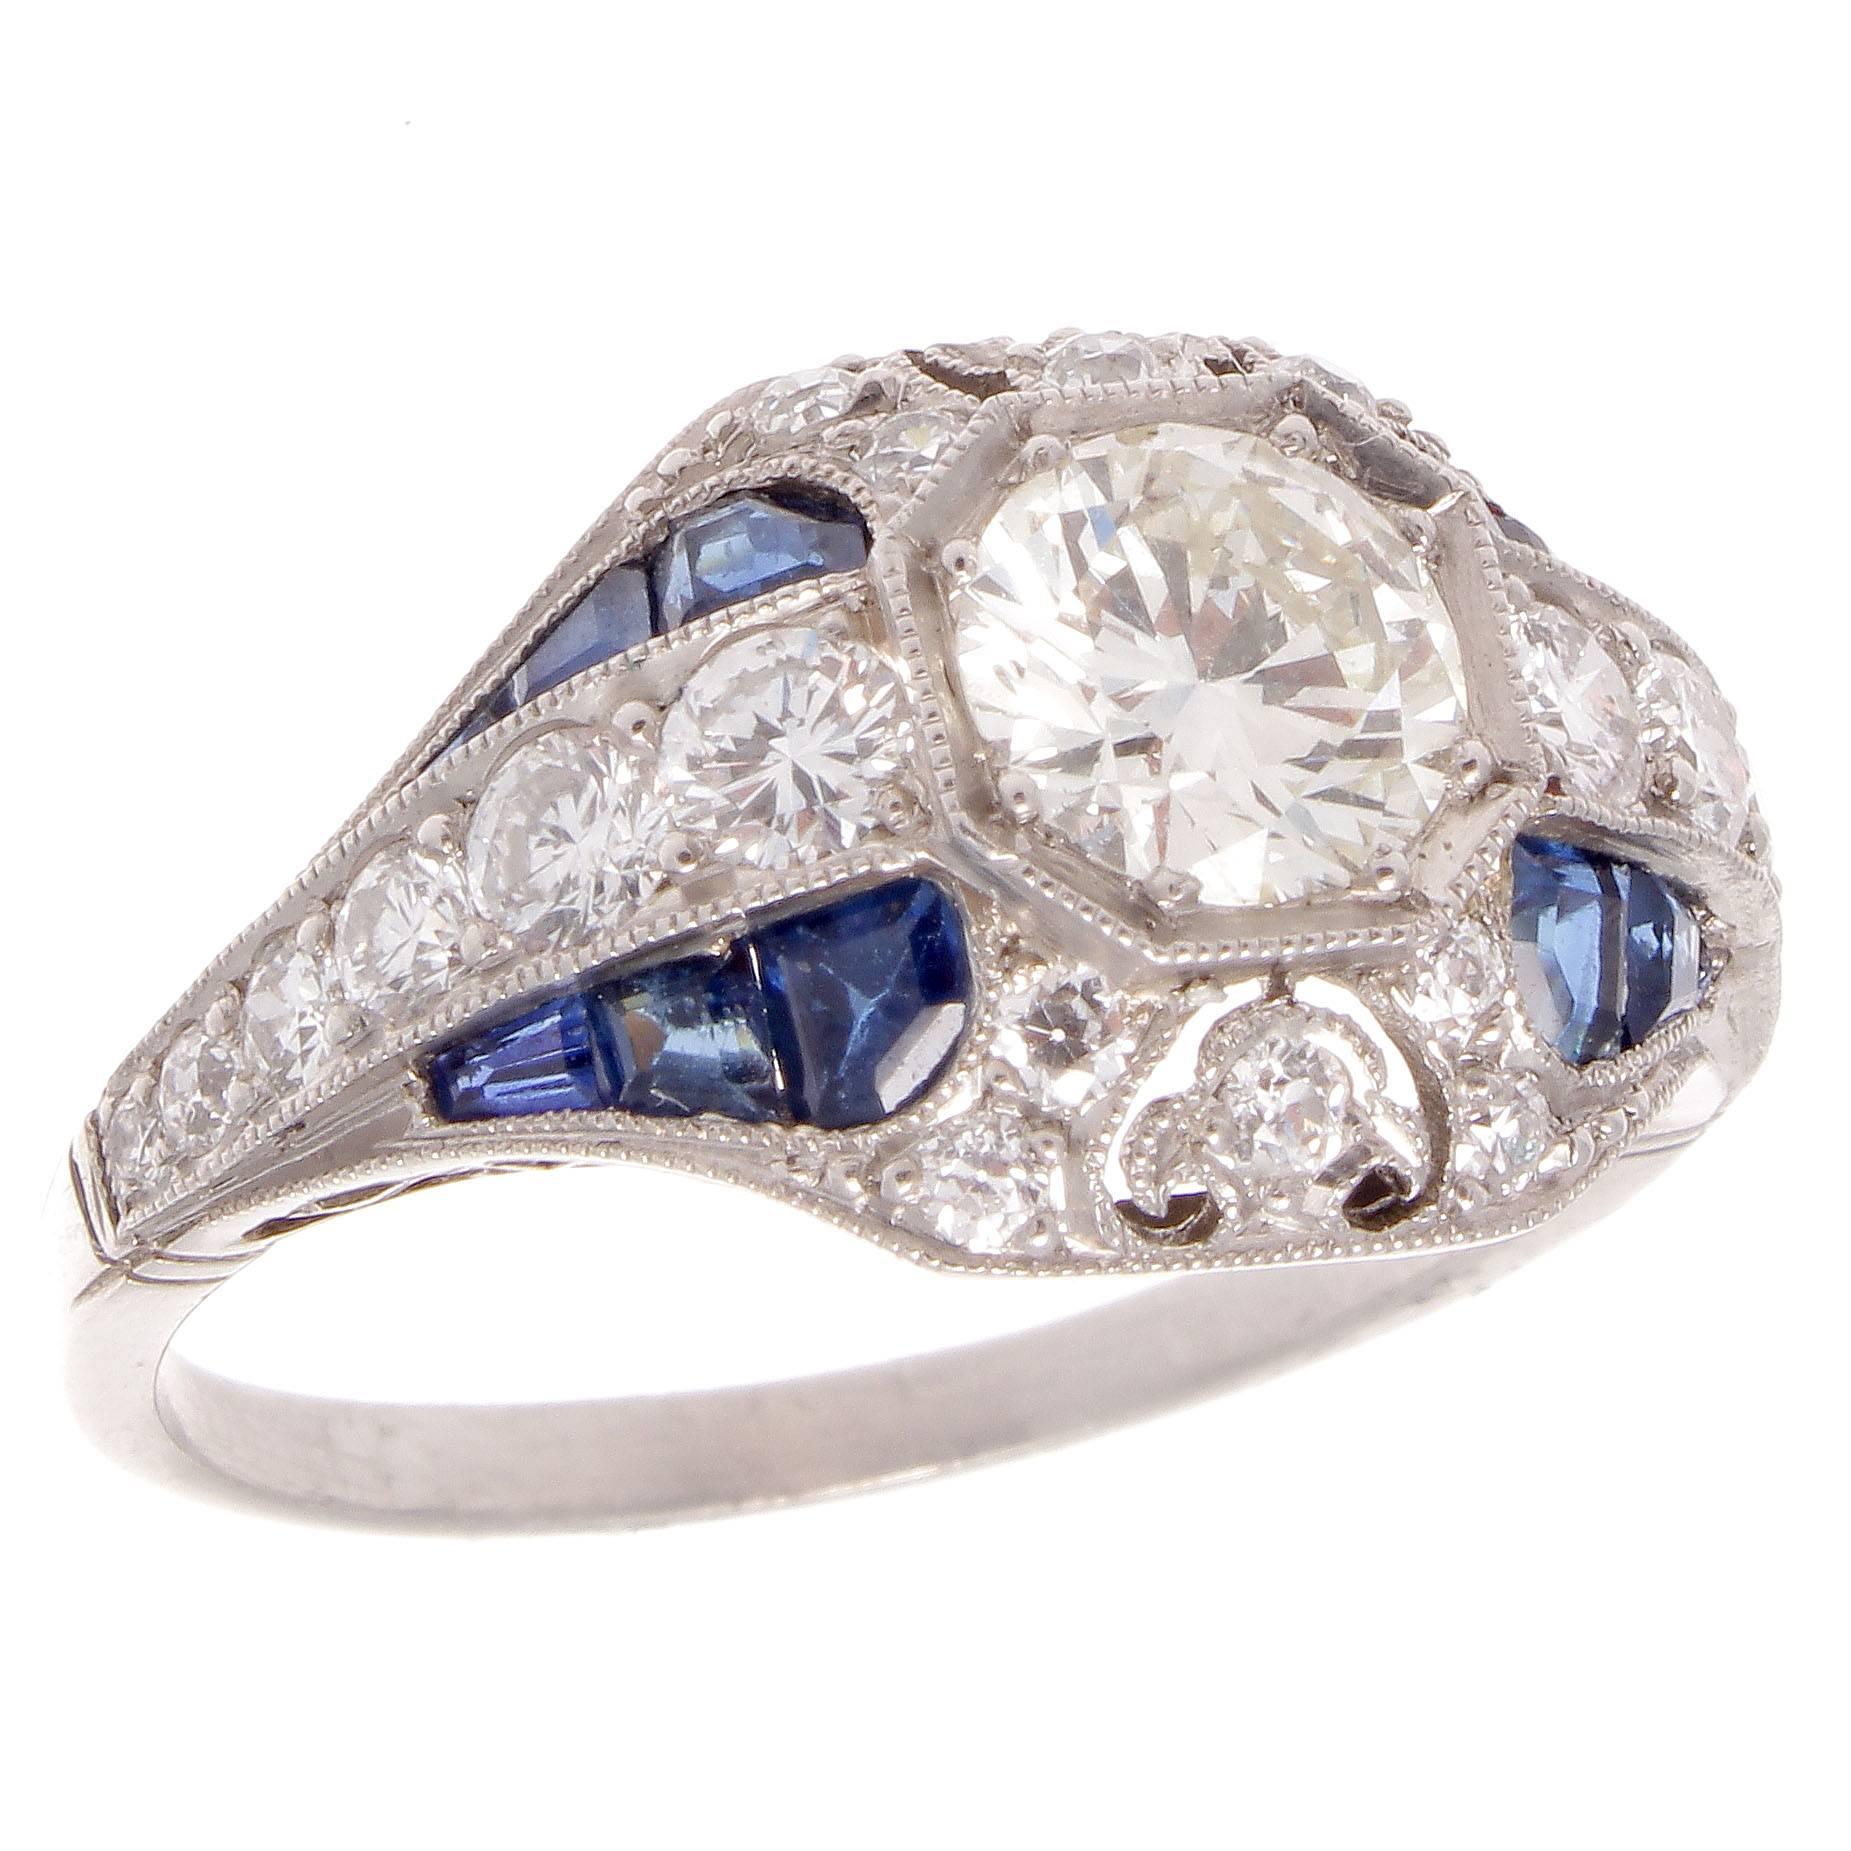 Recreating the golden era of Art Deco jewelry with timeless designs of geometric elegance. Featuring a 0.72 carat round brilliant cut diamond that is I color, VS1 clarity. Perfectly framed by royal blue sapphires weighing approximately 0.60 carats